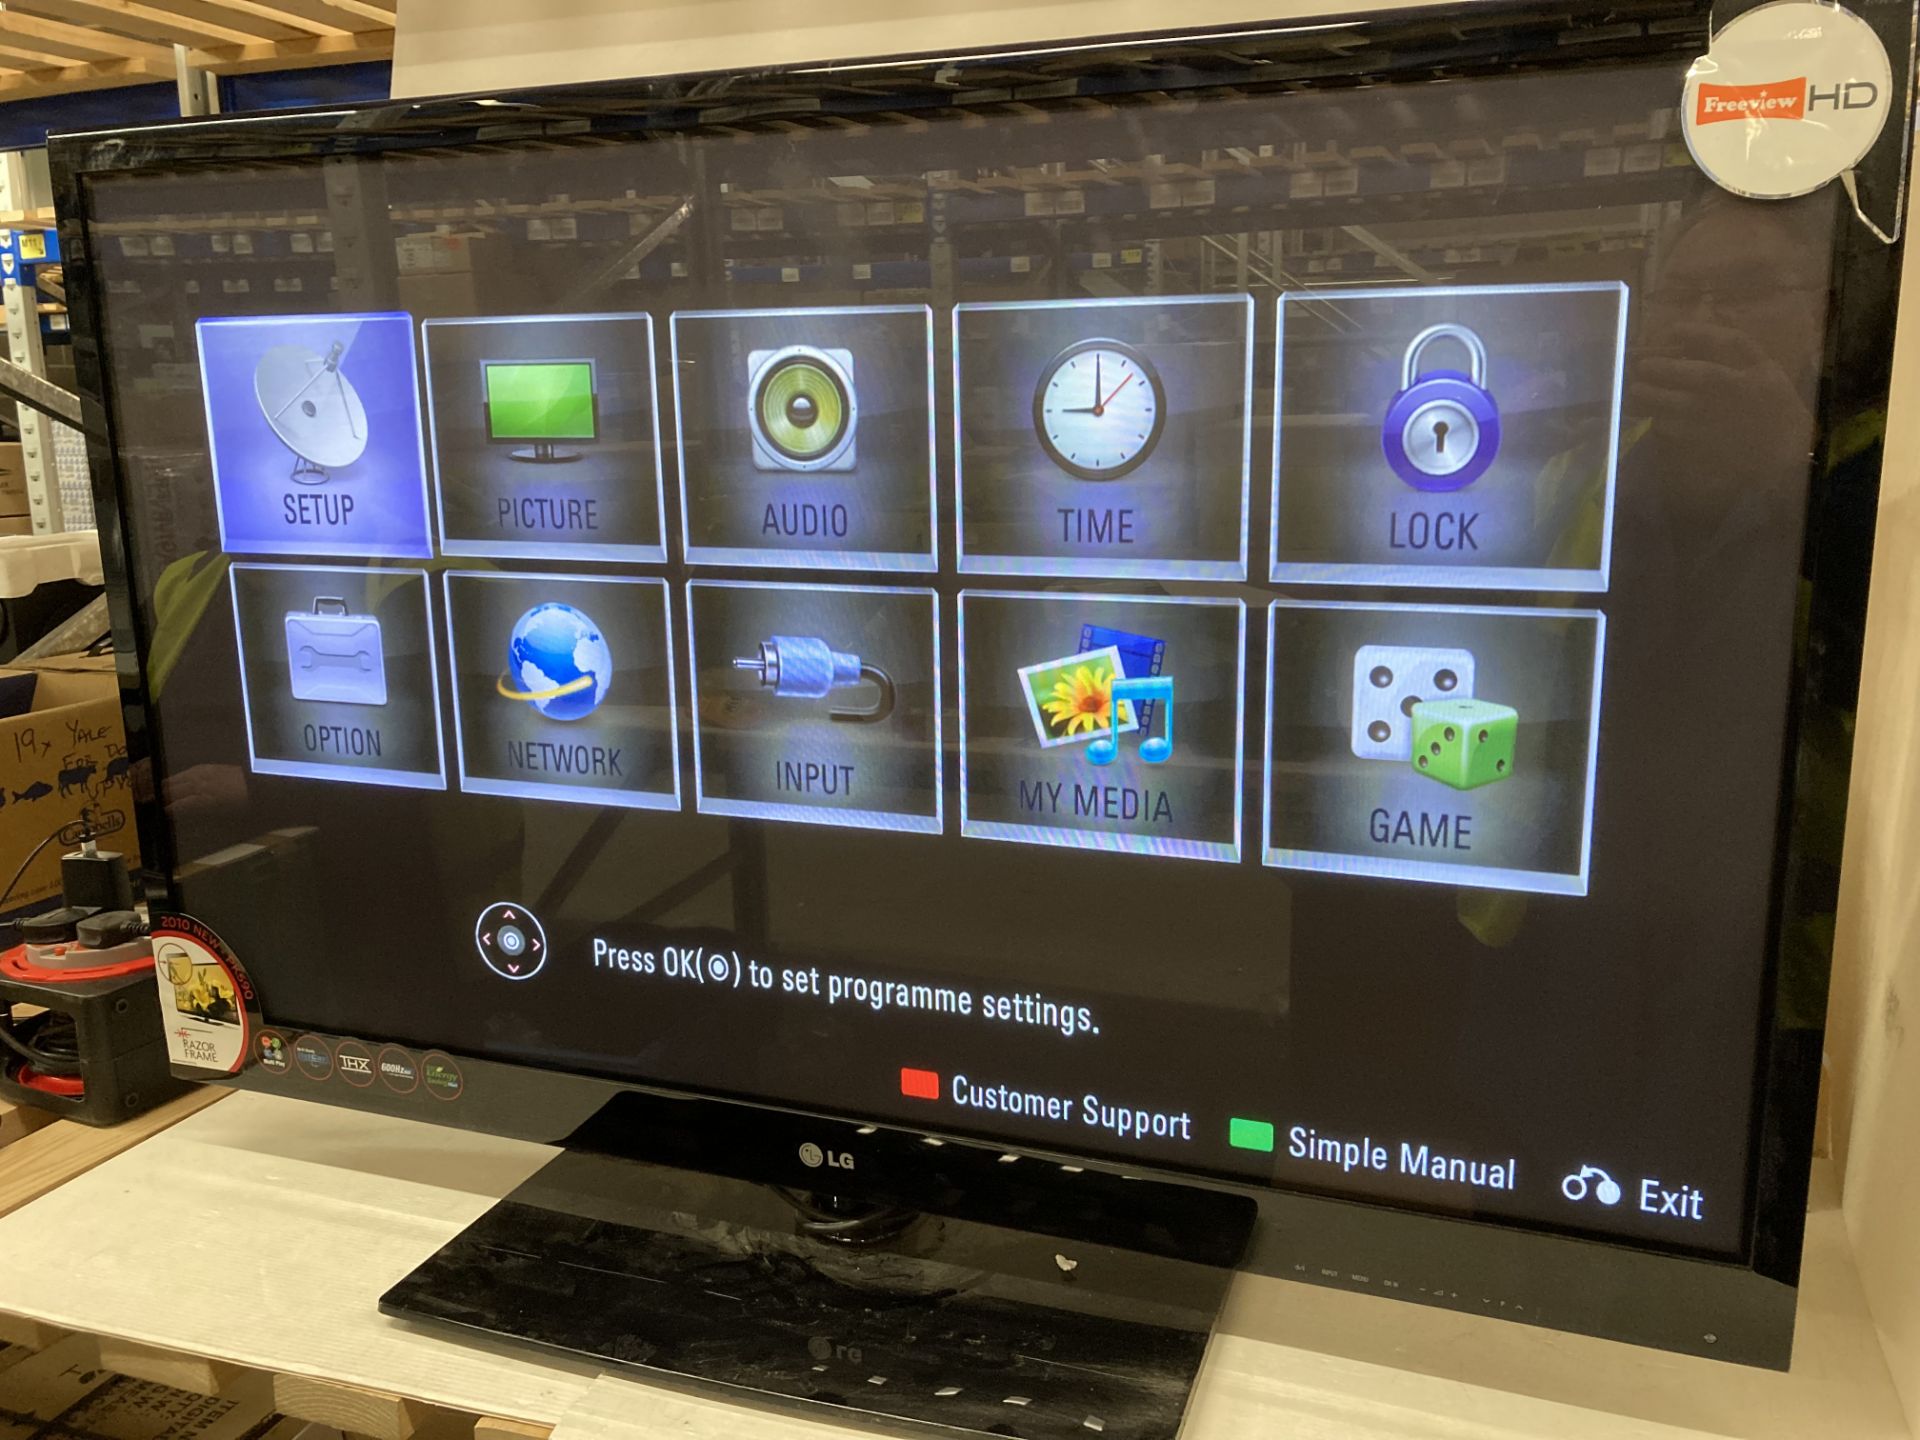 LG 50" HD TV model 50PK590 complete with power lead and remote (E08 FLOOR) Further